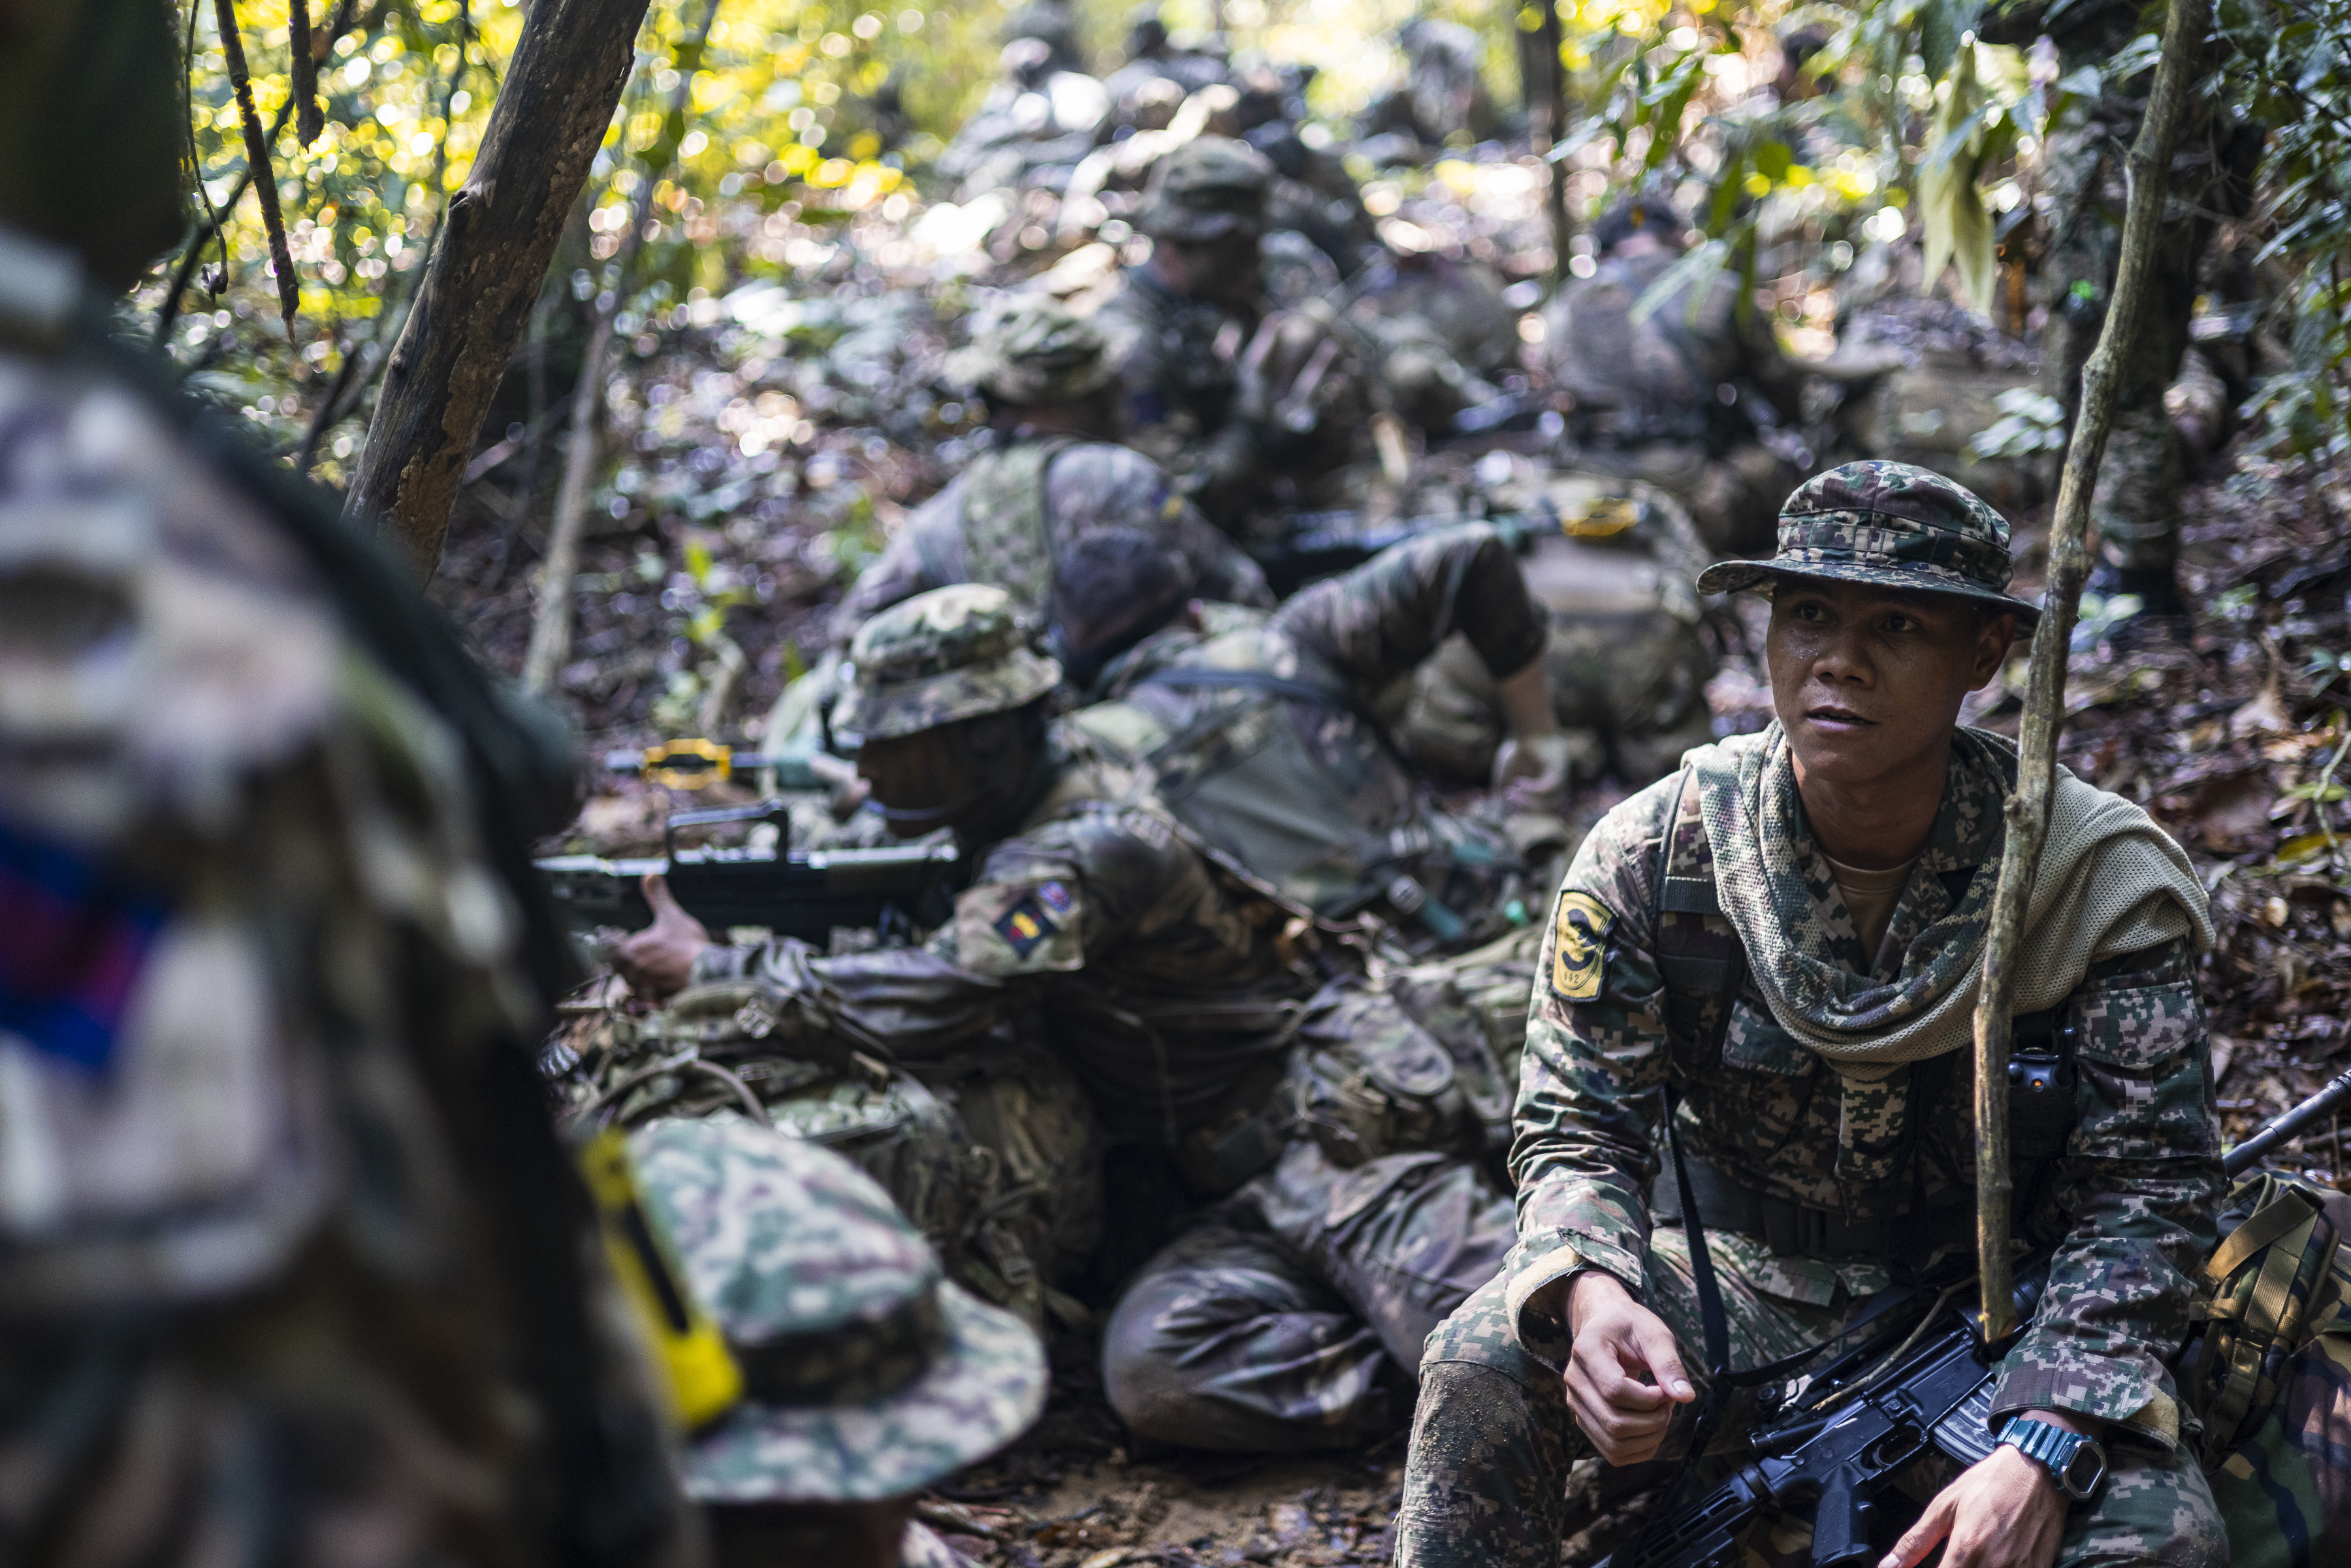 Military personnel in the jungle